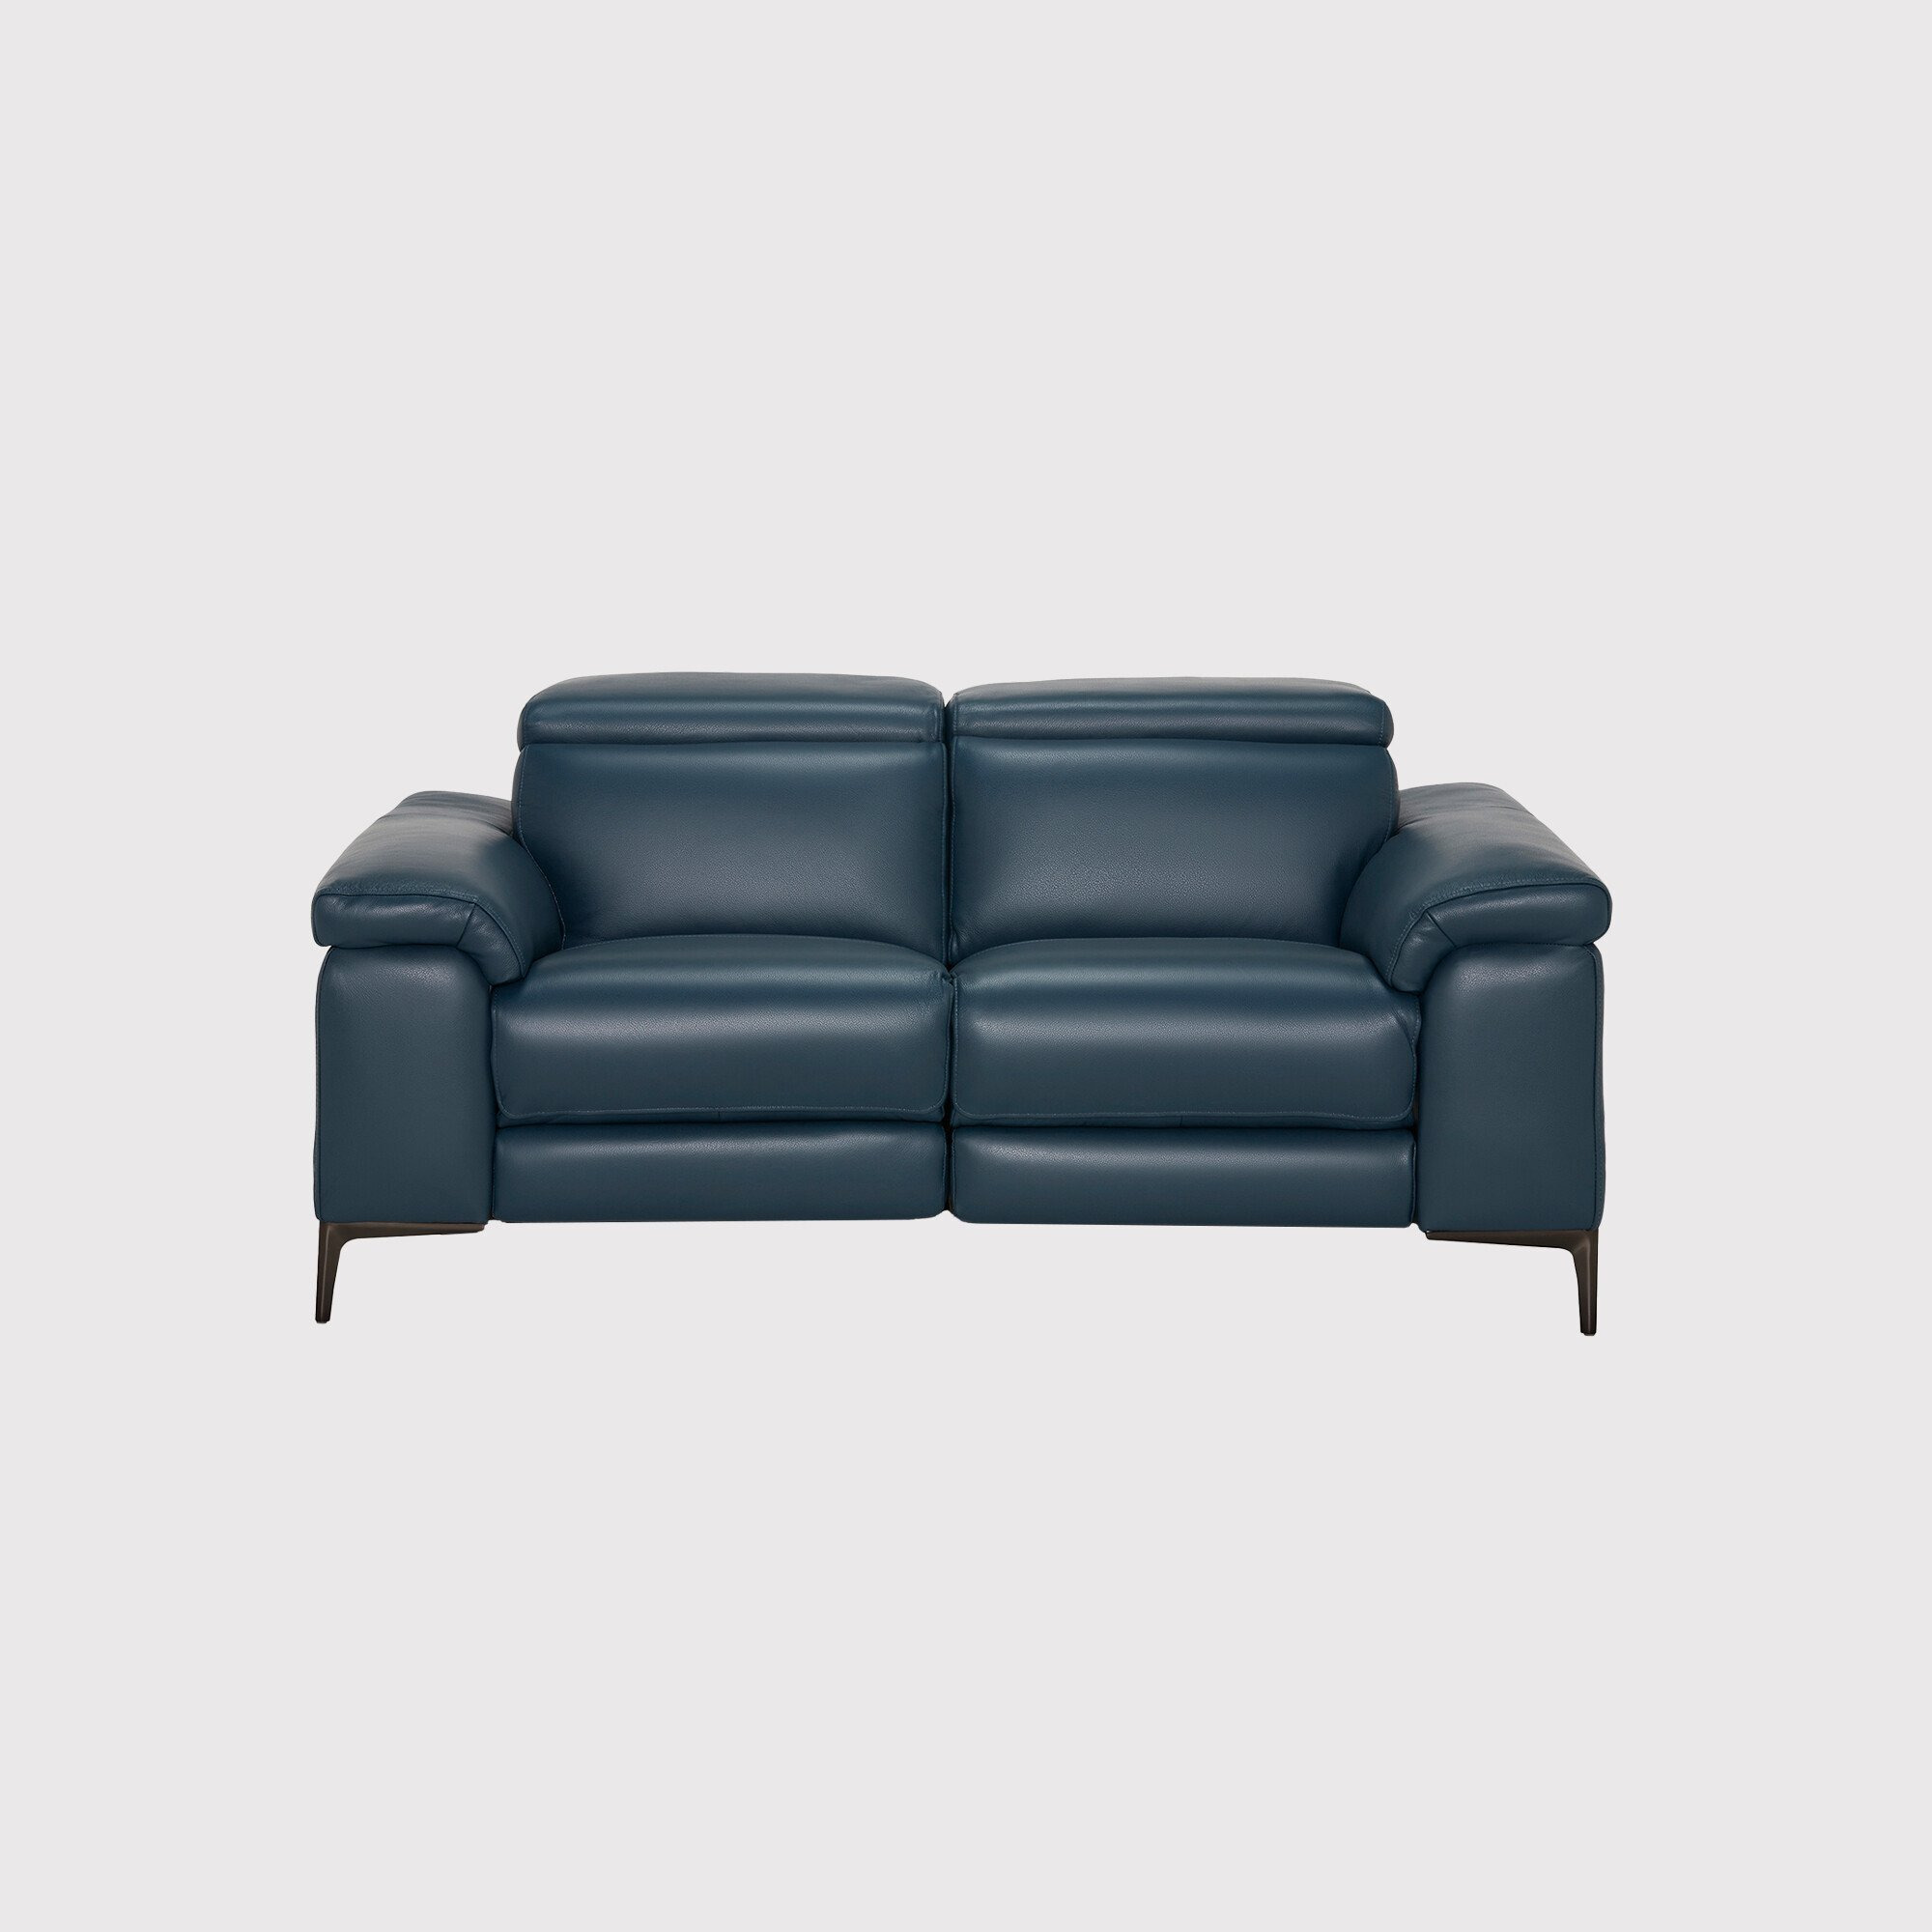 Paolo 2 Seater Electric Recliner Sofa 2 Headrests, Blue Leather - Barker & Stonehouse - image 1